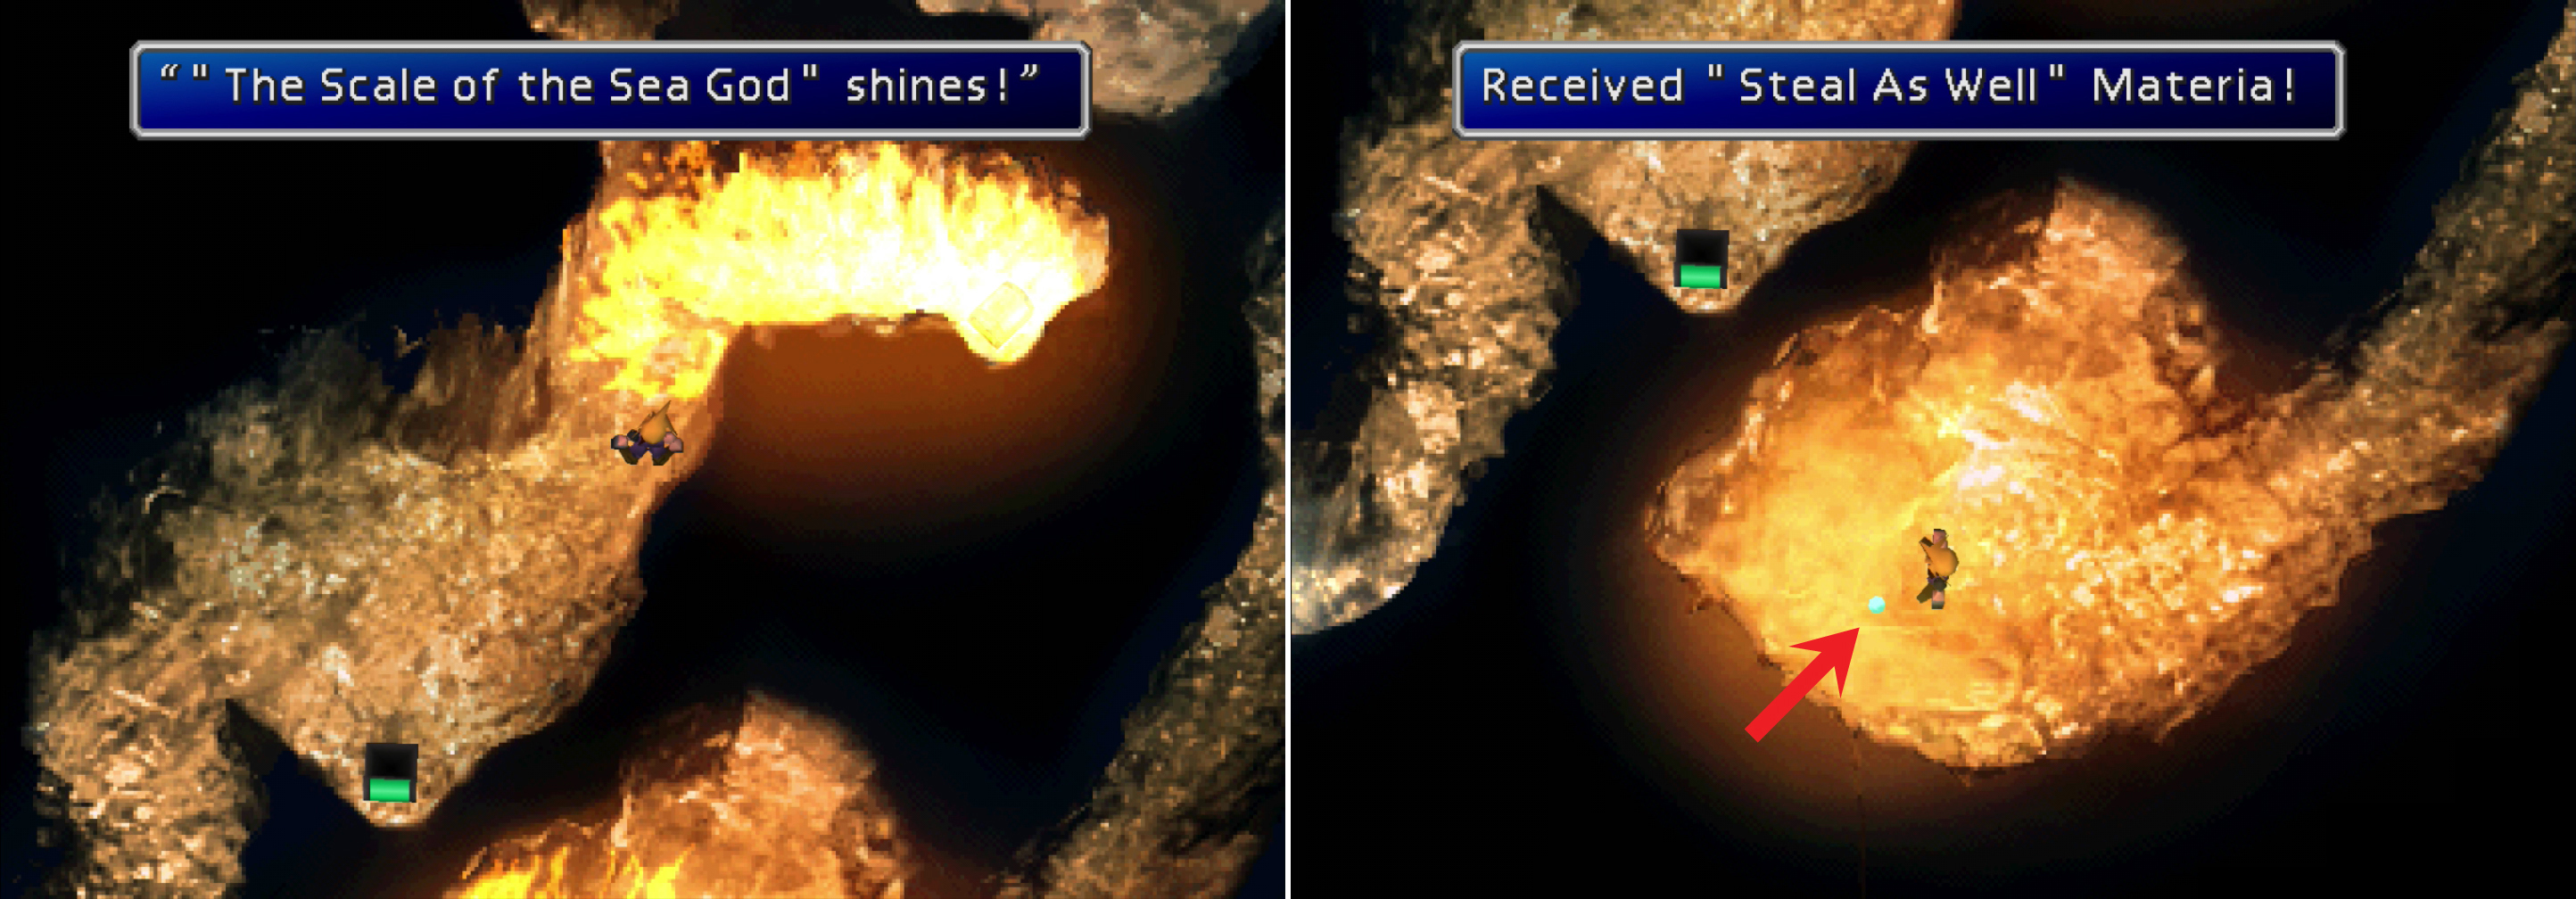 Use the Leviathan Scales to extinguish the flames in the caves on Da-chao (left) and claim some otherwise inaccessible loot, including the Steal As Well Materia (right).